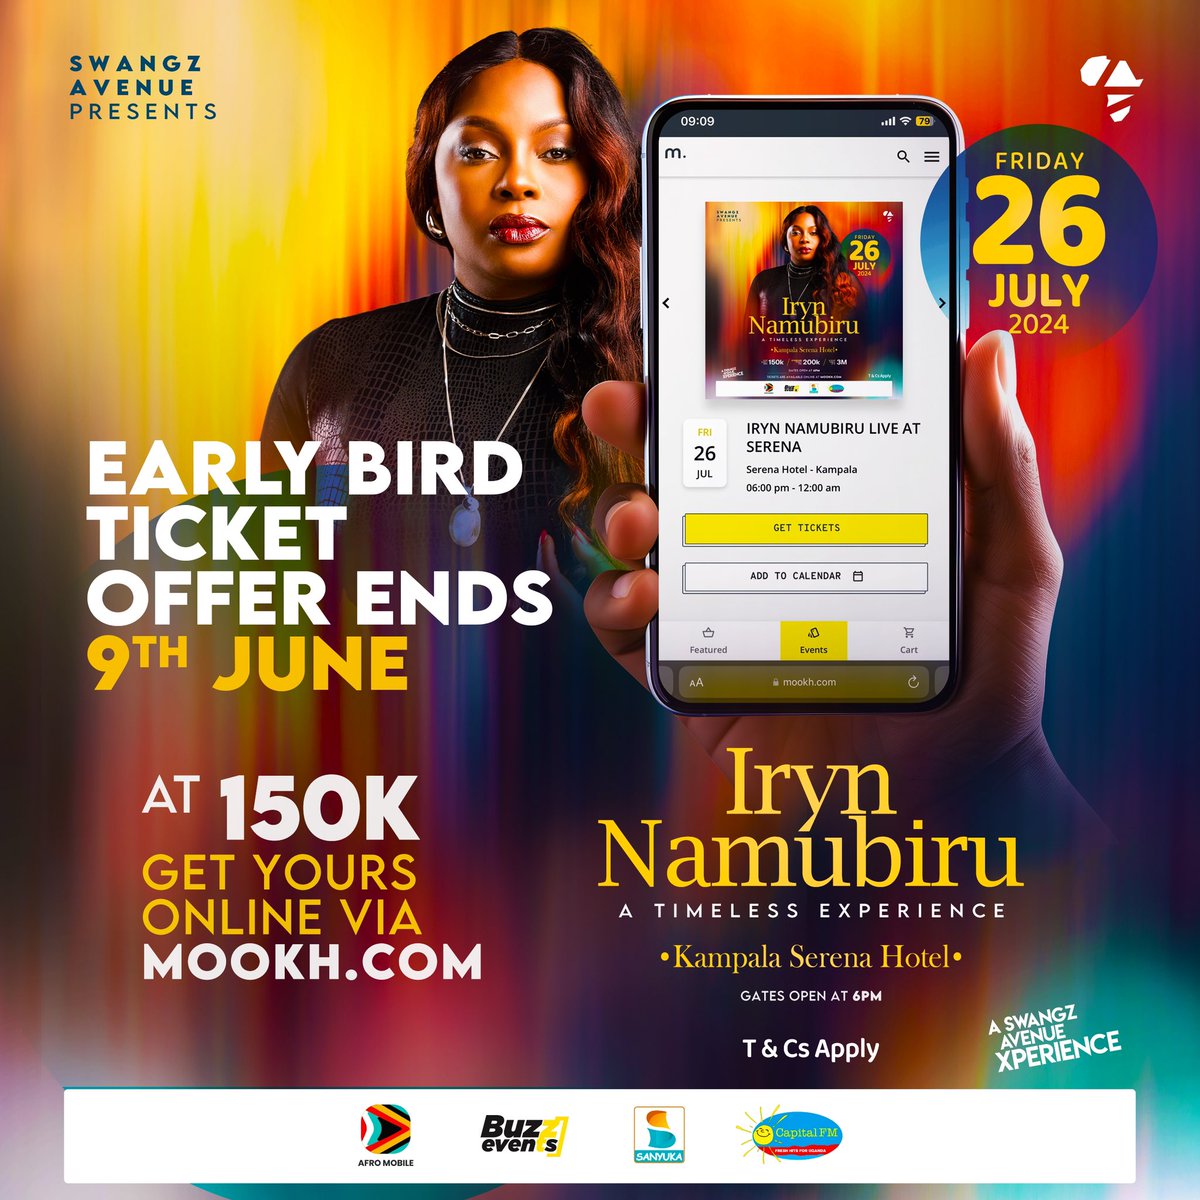 Tickets to the #TimelessExperience with @irynnamubiru on sale now 

Get yours now online 
Via bit.ly/3TMYget